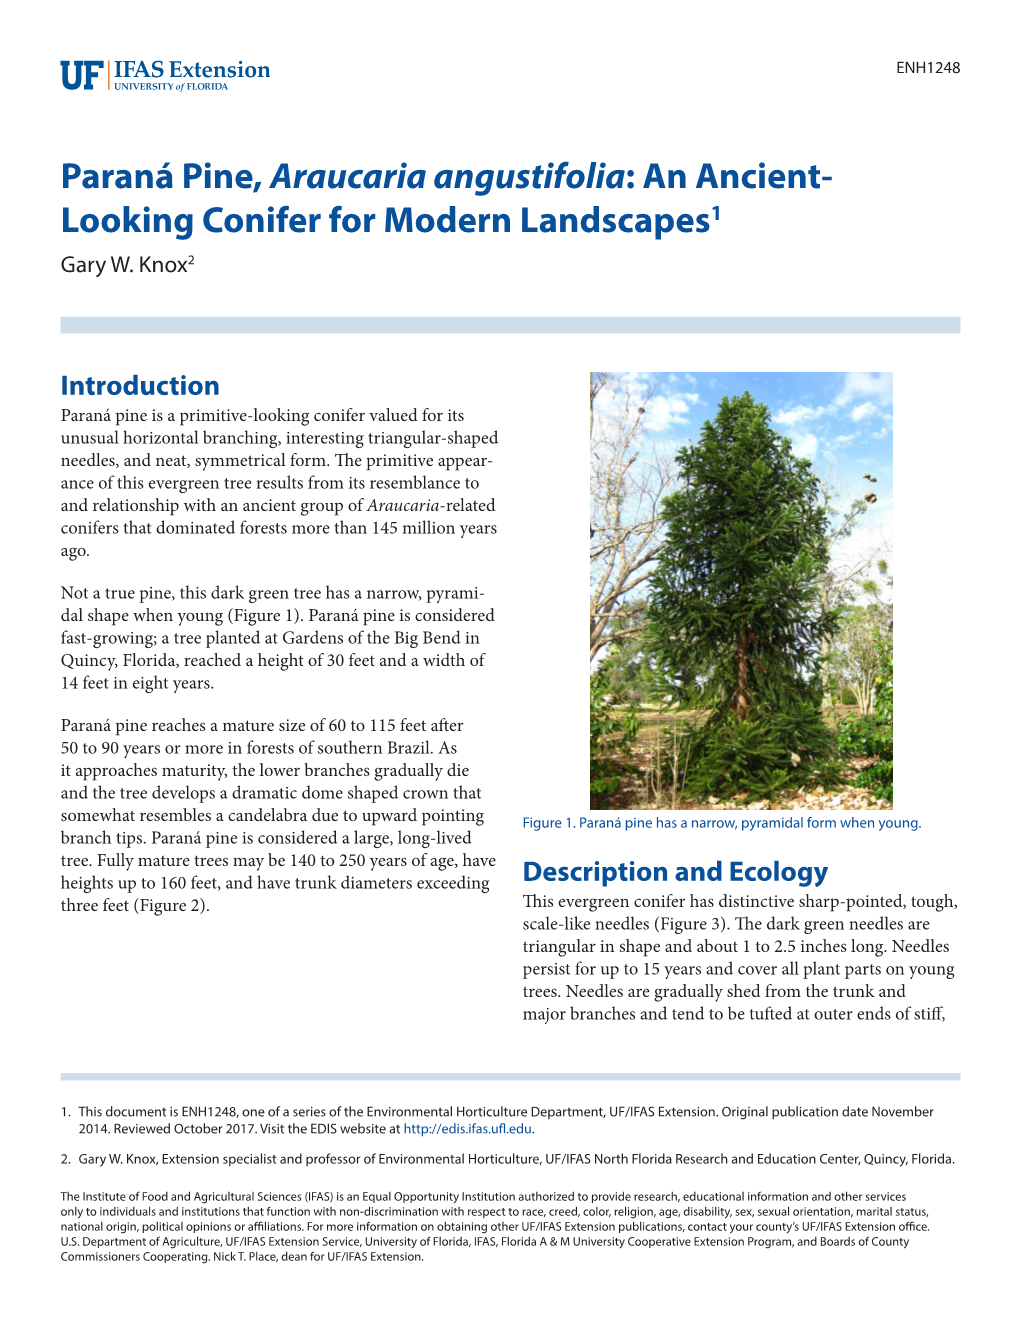 Paraná Pine, Araucaria Angustifolia: an Ancient- Looking Conifer for Modern Landscapes1 Gary W